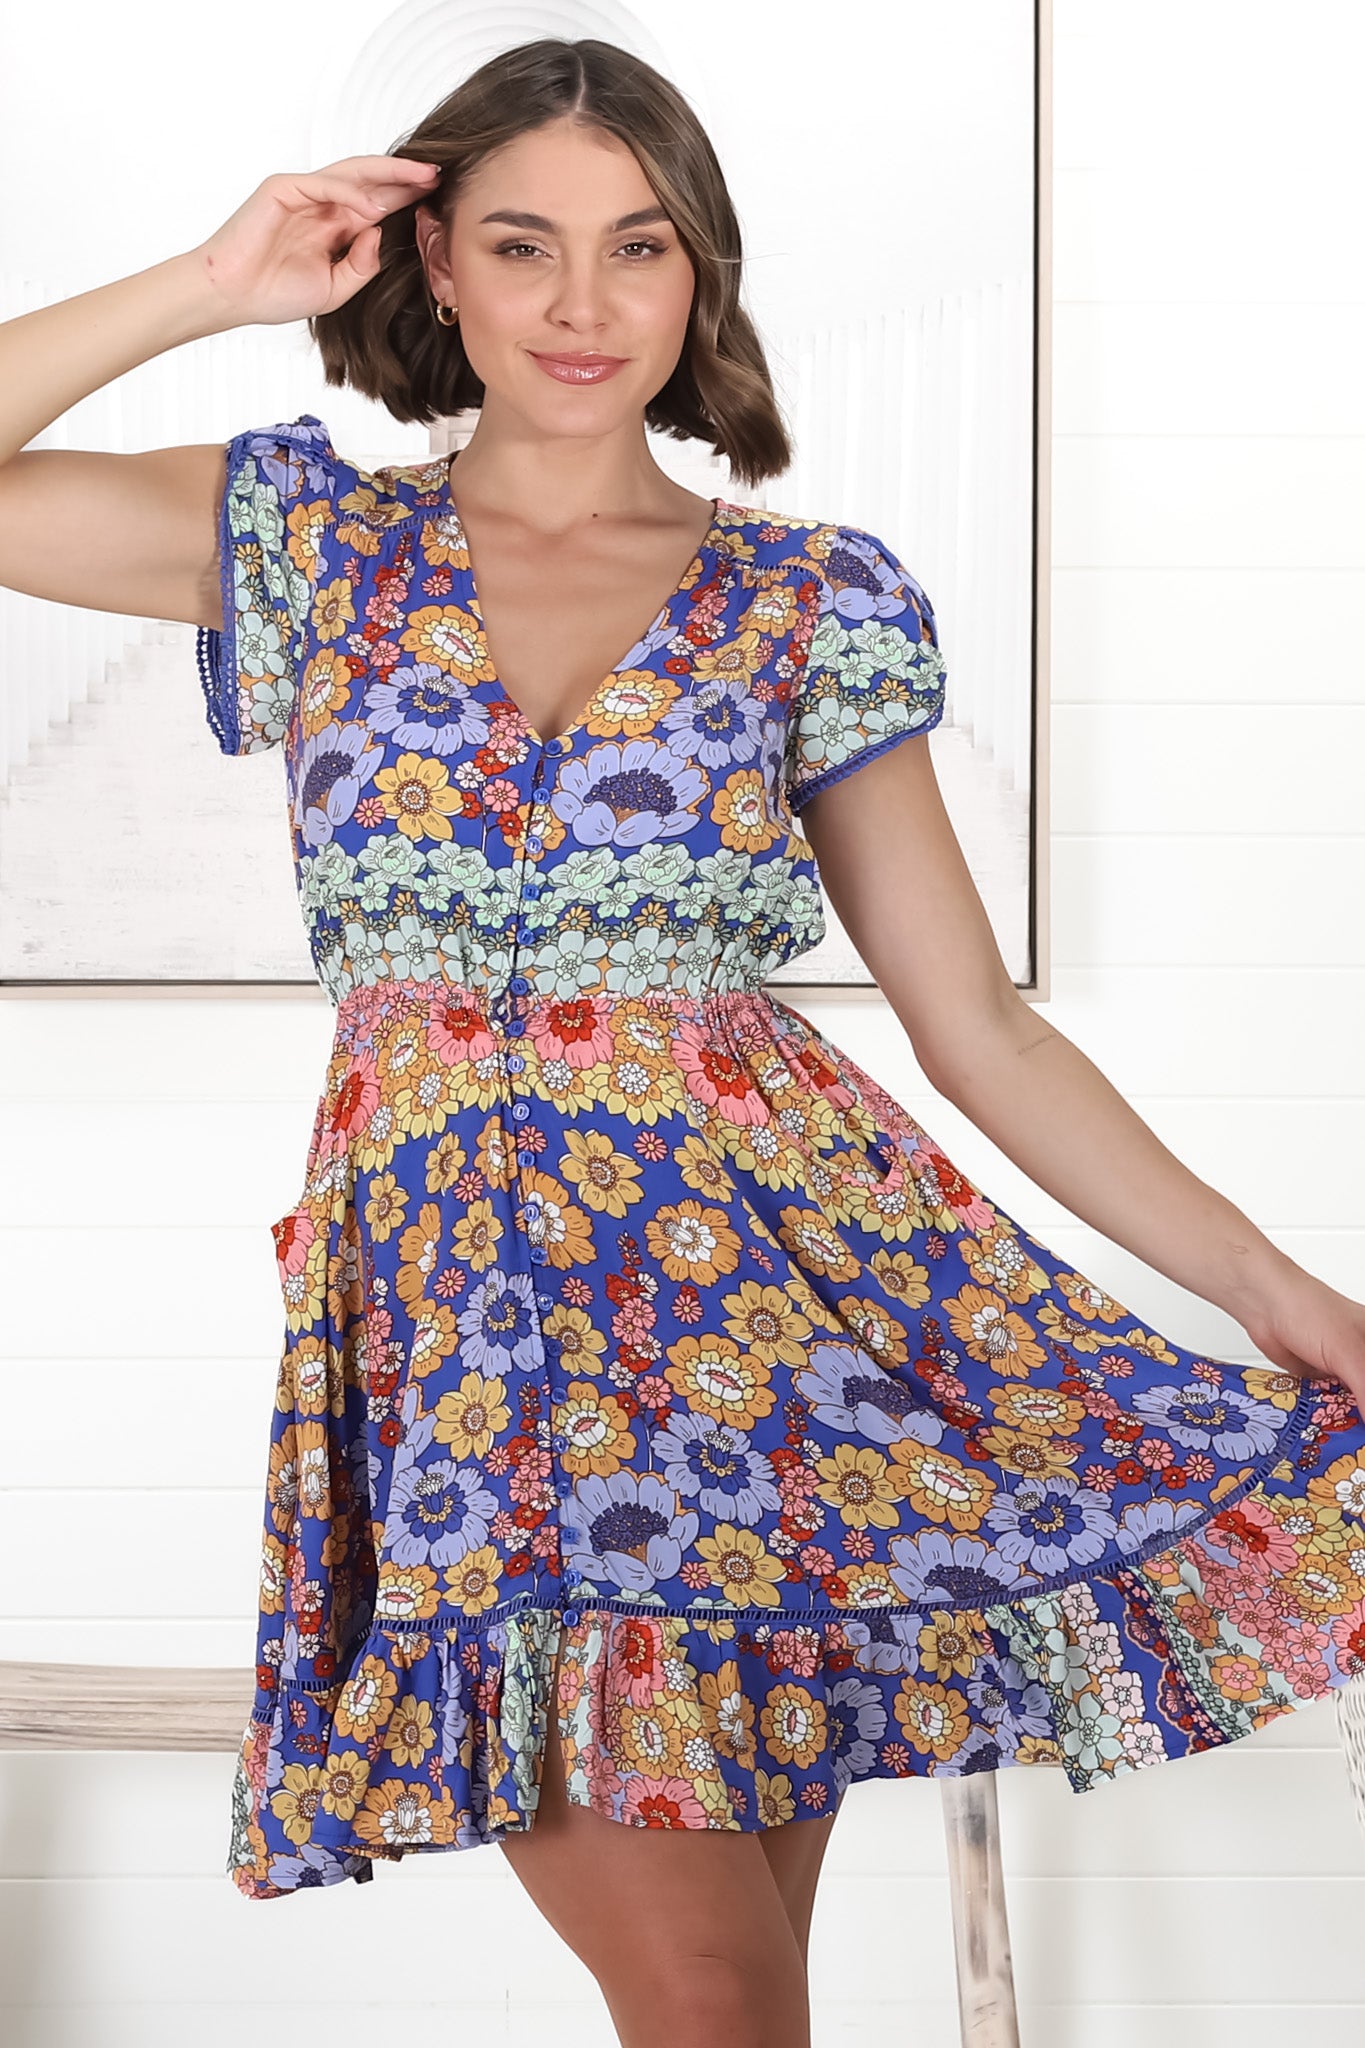 JAASE - Lizzie Mini Dress: Butterfly Cap Sleeve Button Down Dress with Pockets in Eden Print